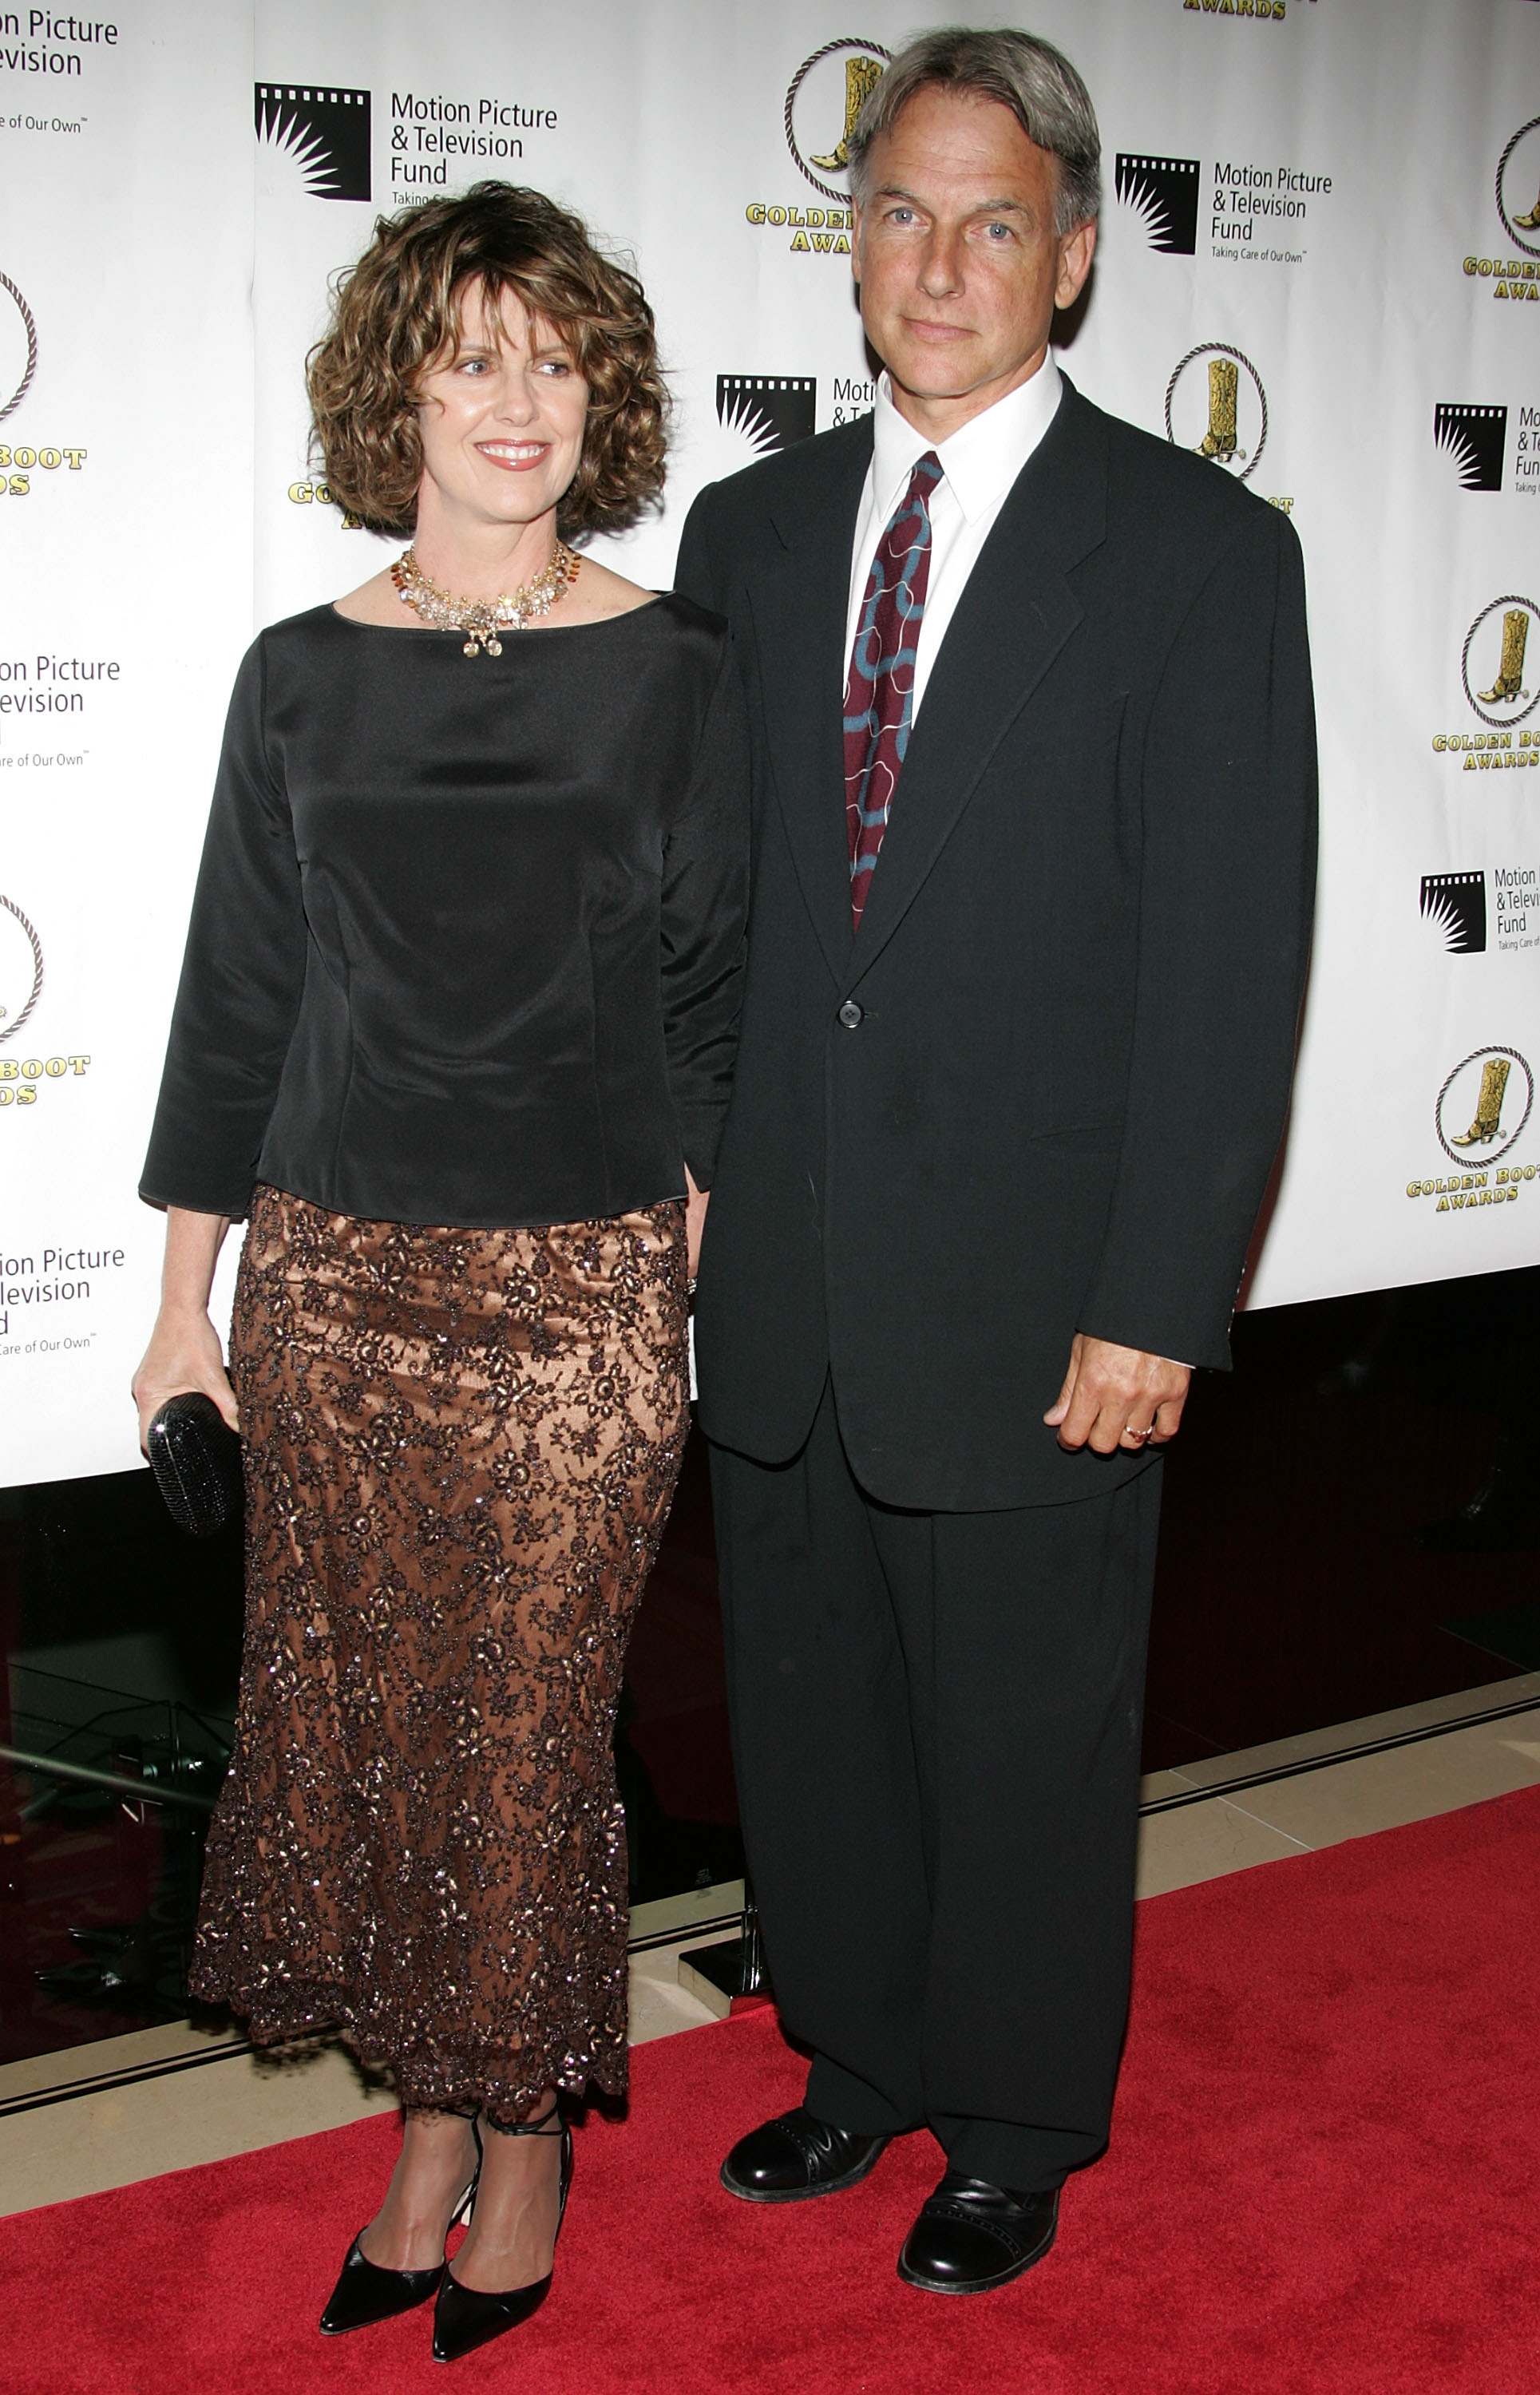 Mark Harmon and his wife  Pam Dawber in Los Angeles in 2005 | Source: Getty Images